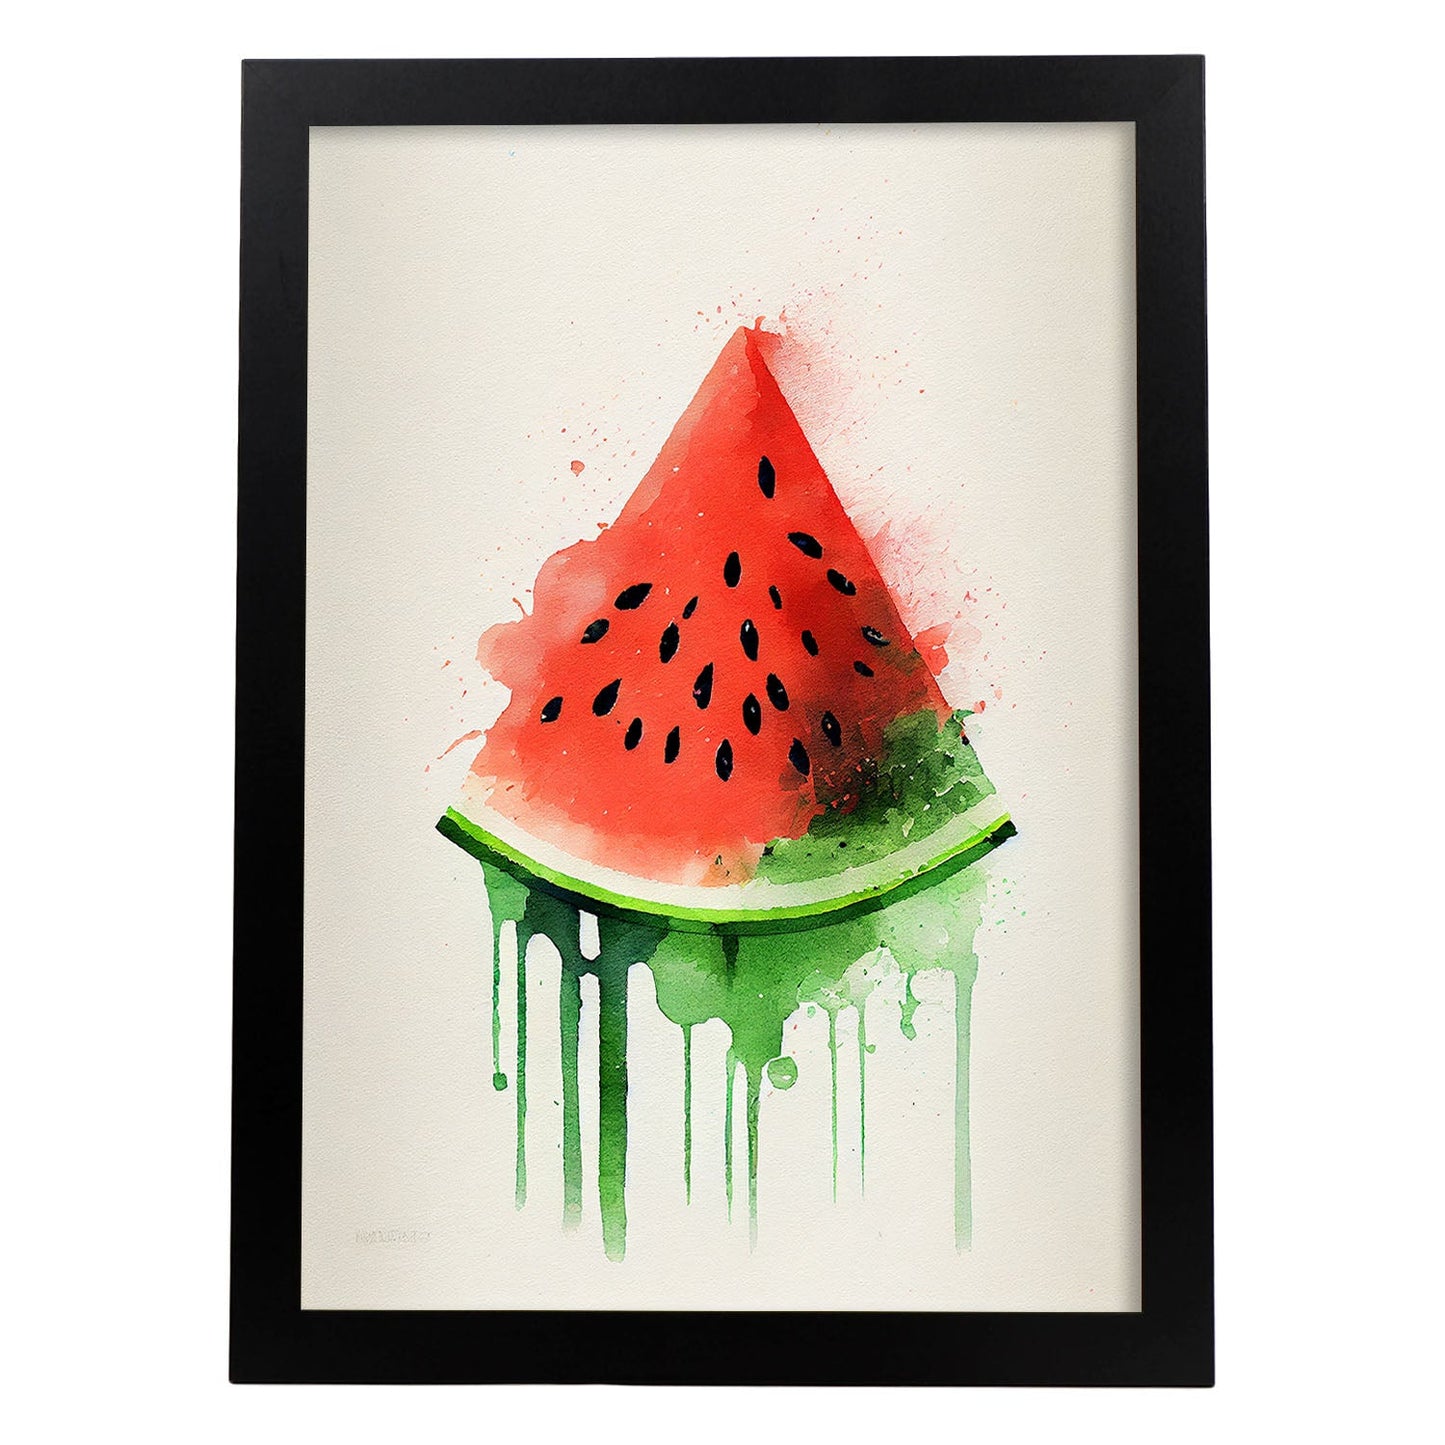 Nacnic minimalist Watermelon_1. Aesthetic Wall Art Prints for Bedroom or Living Room Design.